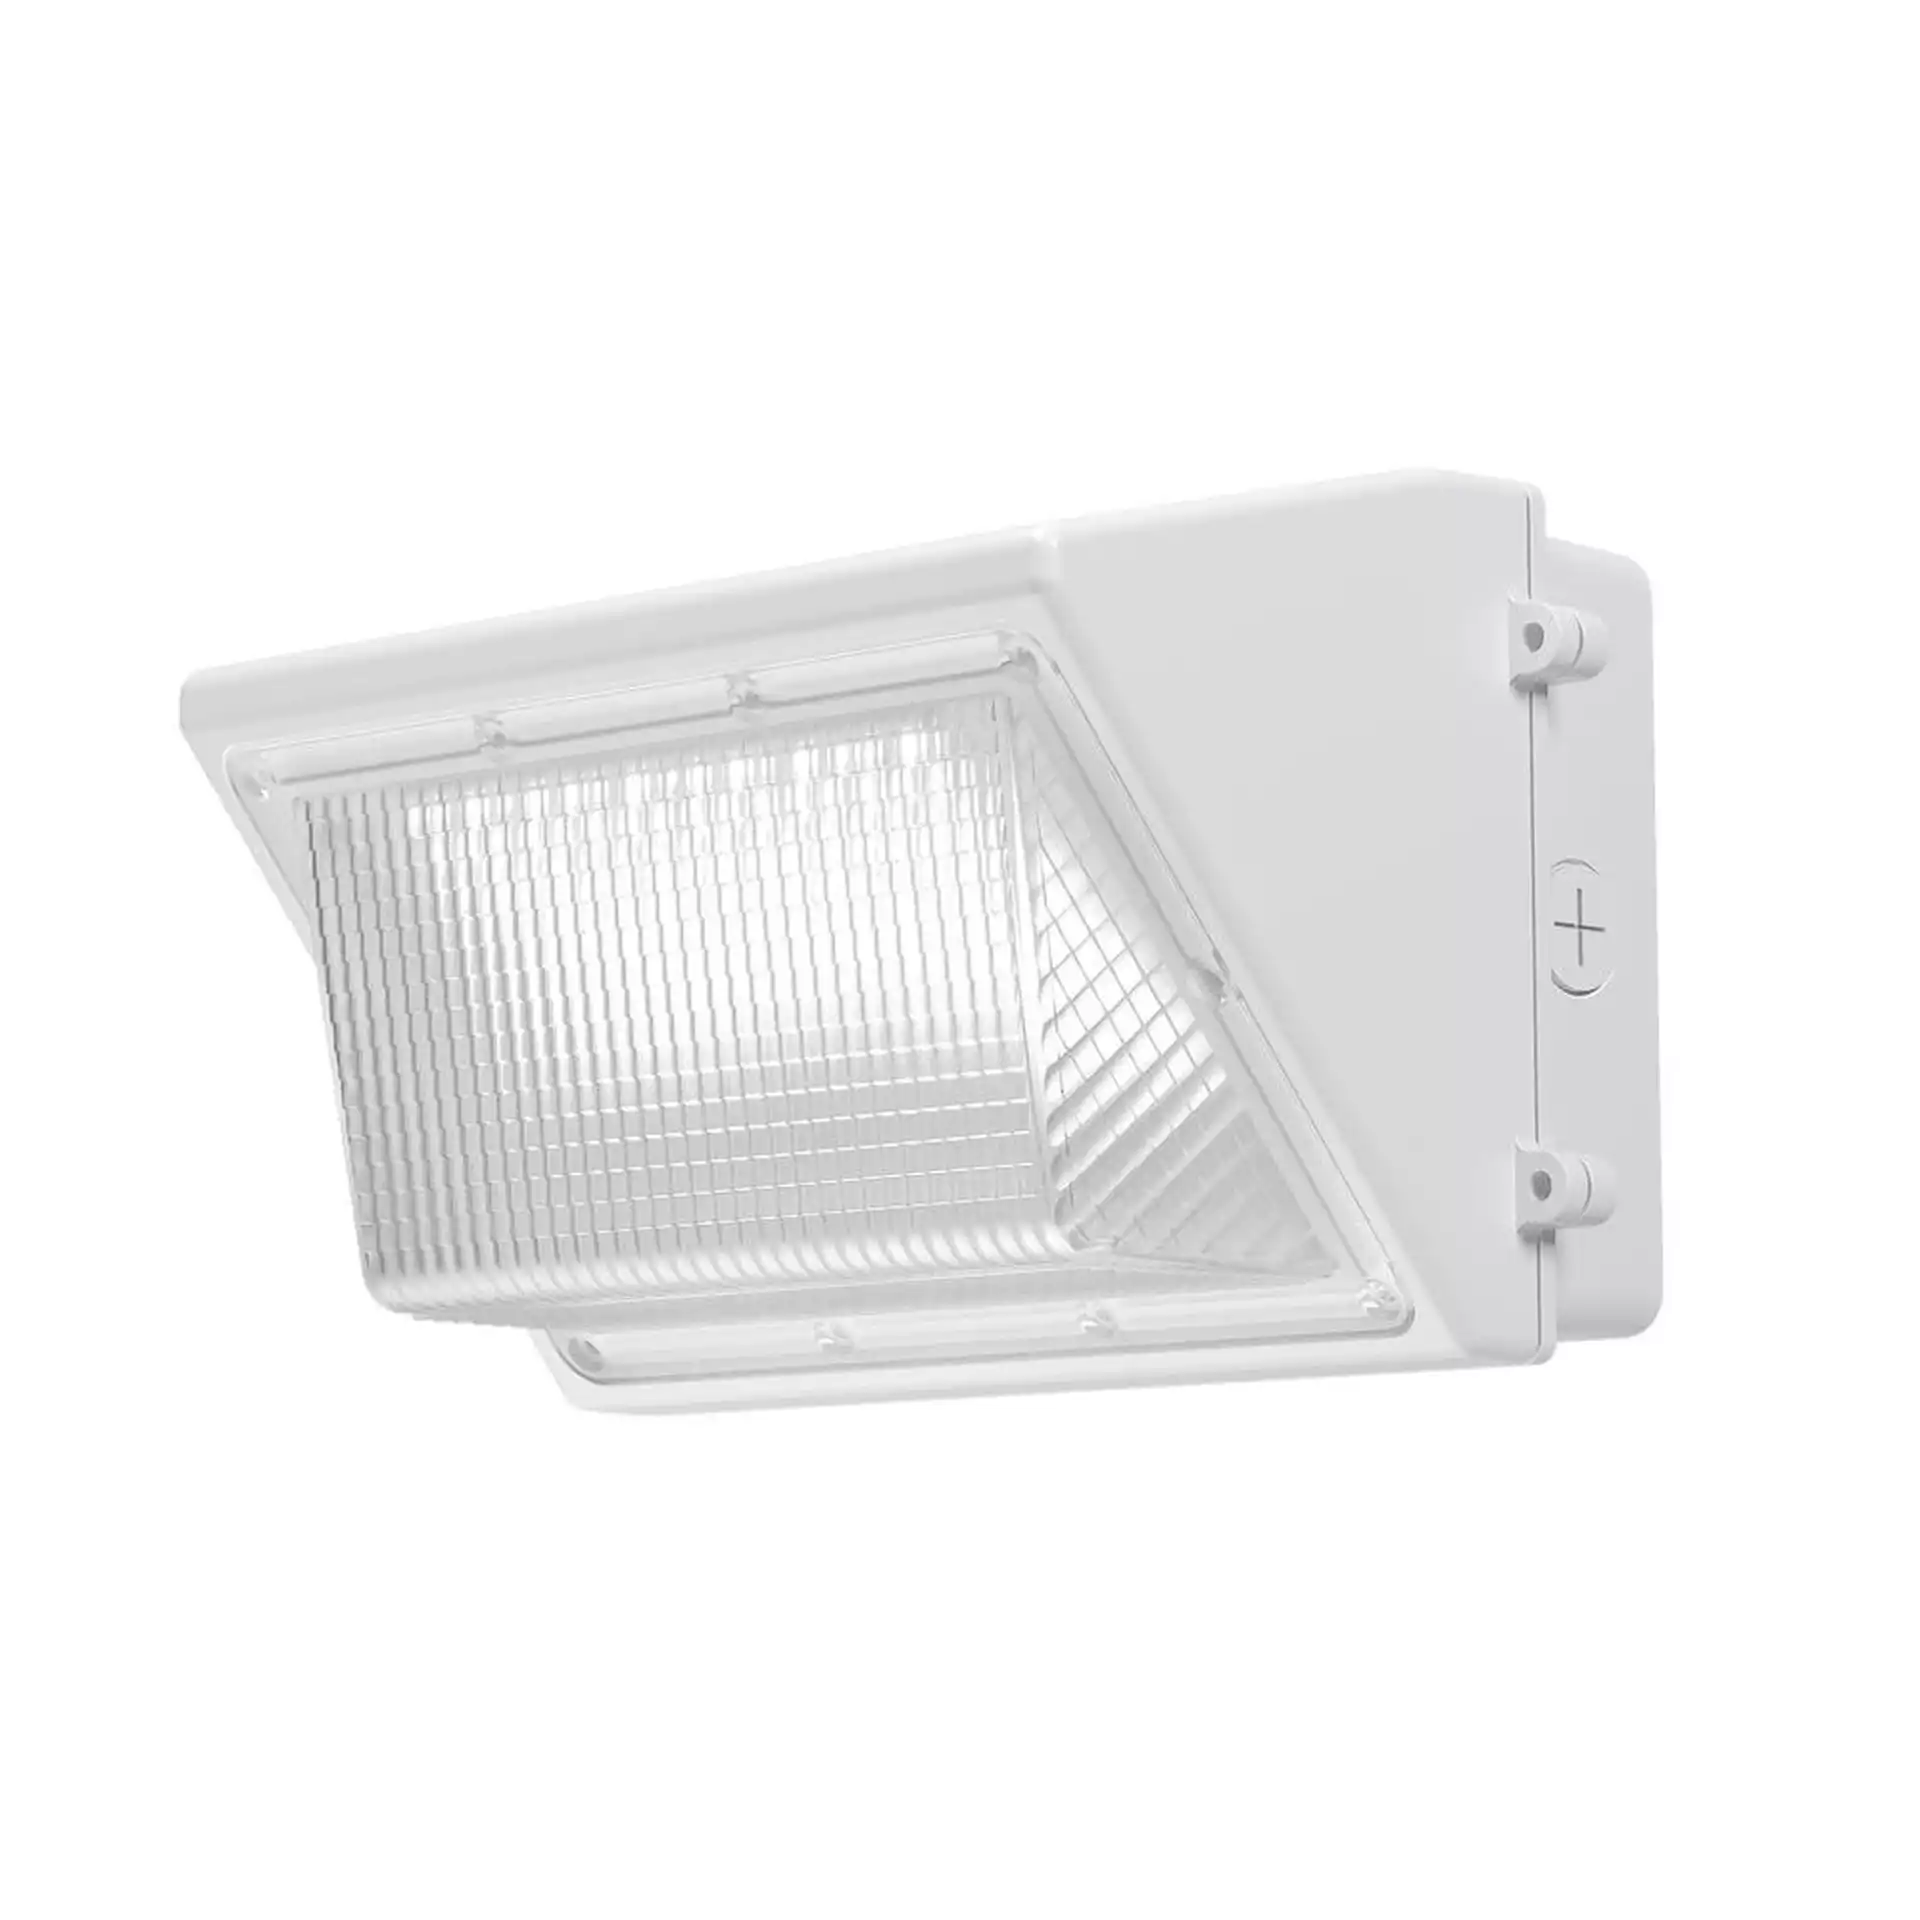 PROBRITE 70-Watt Equivalent Integrated LED Wall Pack, 3300 Lumens, White Outdoor Security Lighting